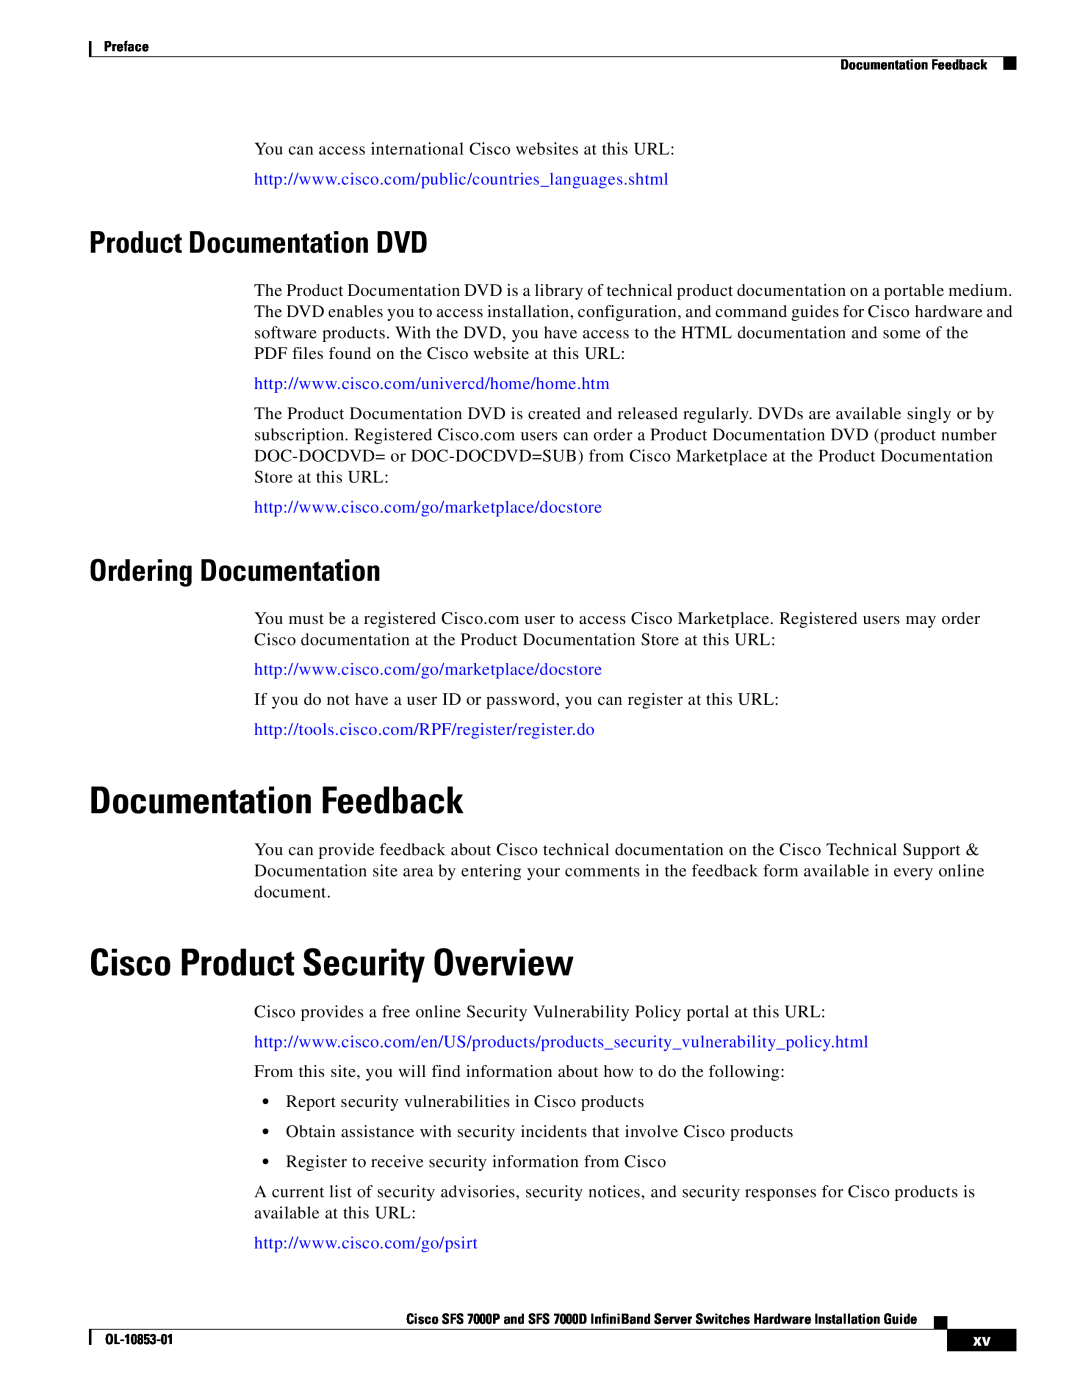 Cisco Systems SFS 7000D, SFS 7000P manual Documentation Feedback, Cisco Product Security Overview, Product Documentation DVD 